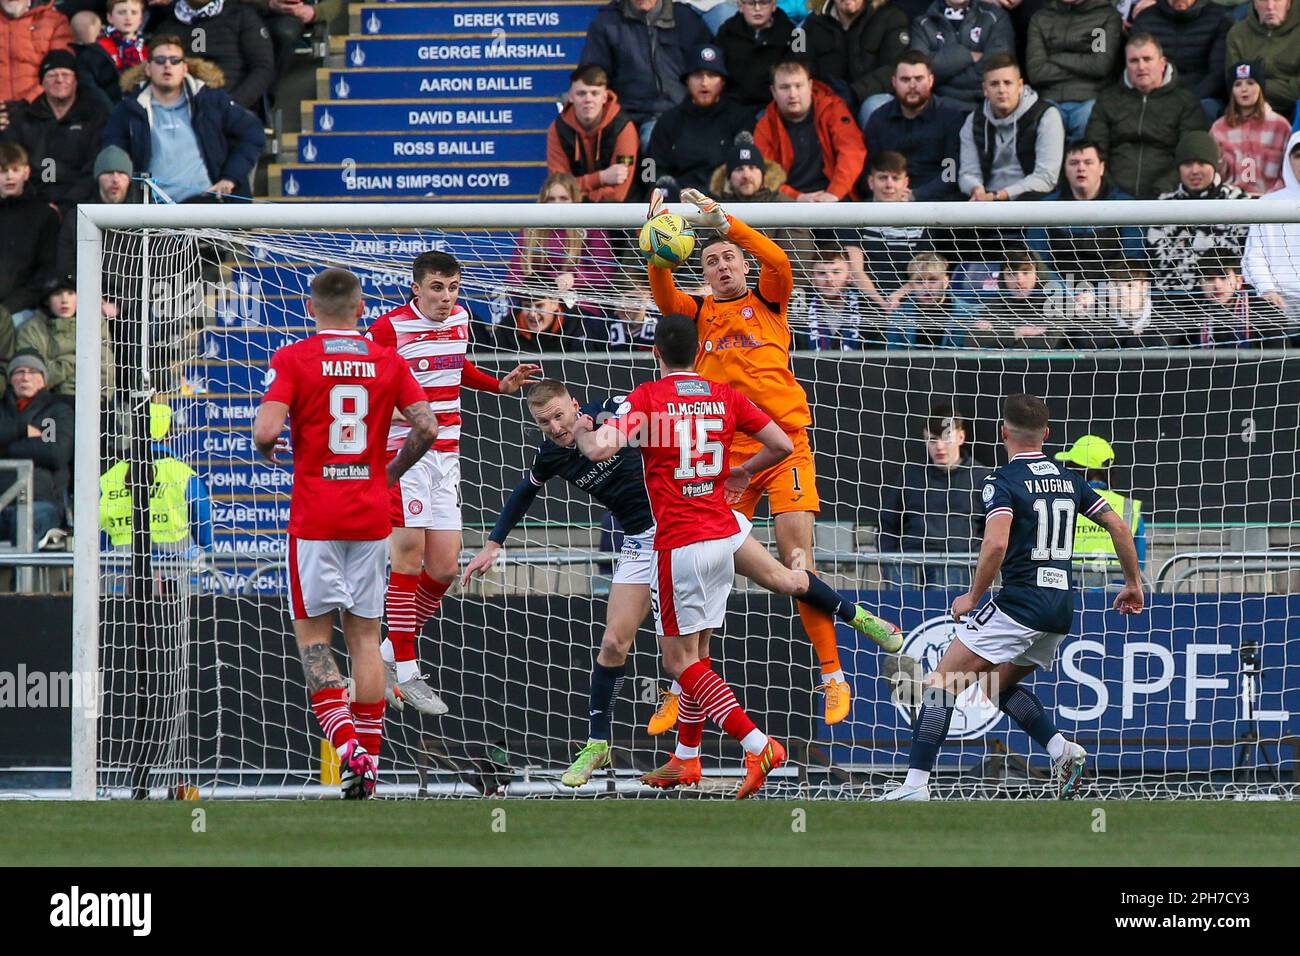 Falkirk, UK. 26th Mar, 2023. UK. The SPFL Trust Trophy Final between Raith Rovers and Hamilton academical was held at Falkirk Stadium, Falkirk, Scotland, UK. The score was 1 - 0 to Hamilton Academical with Reghan Tumilty (number 22) scoring the only and winning goal. Credit; Credit: Findlay/Alamy Live News Stock Photo